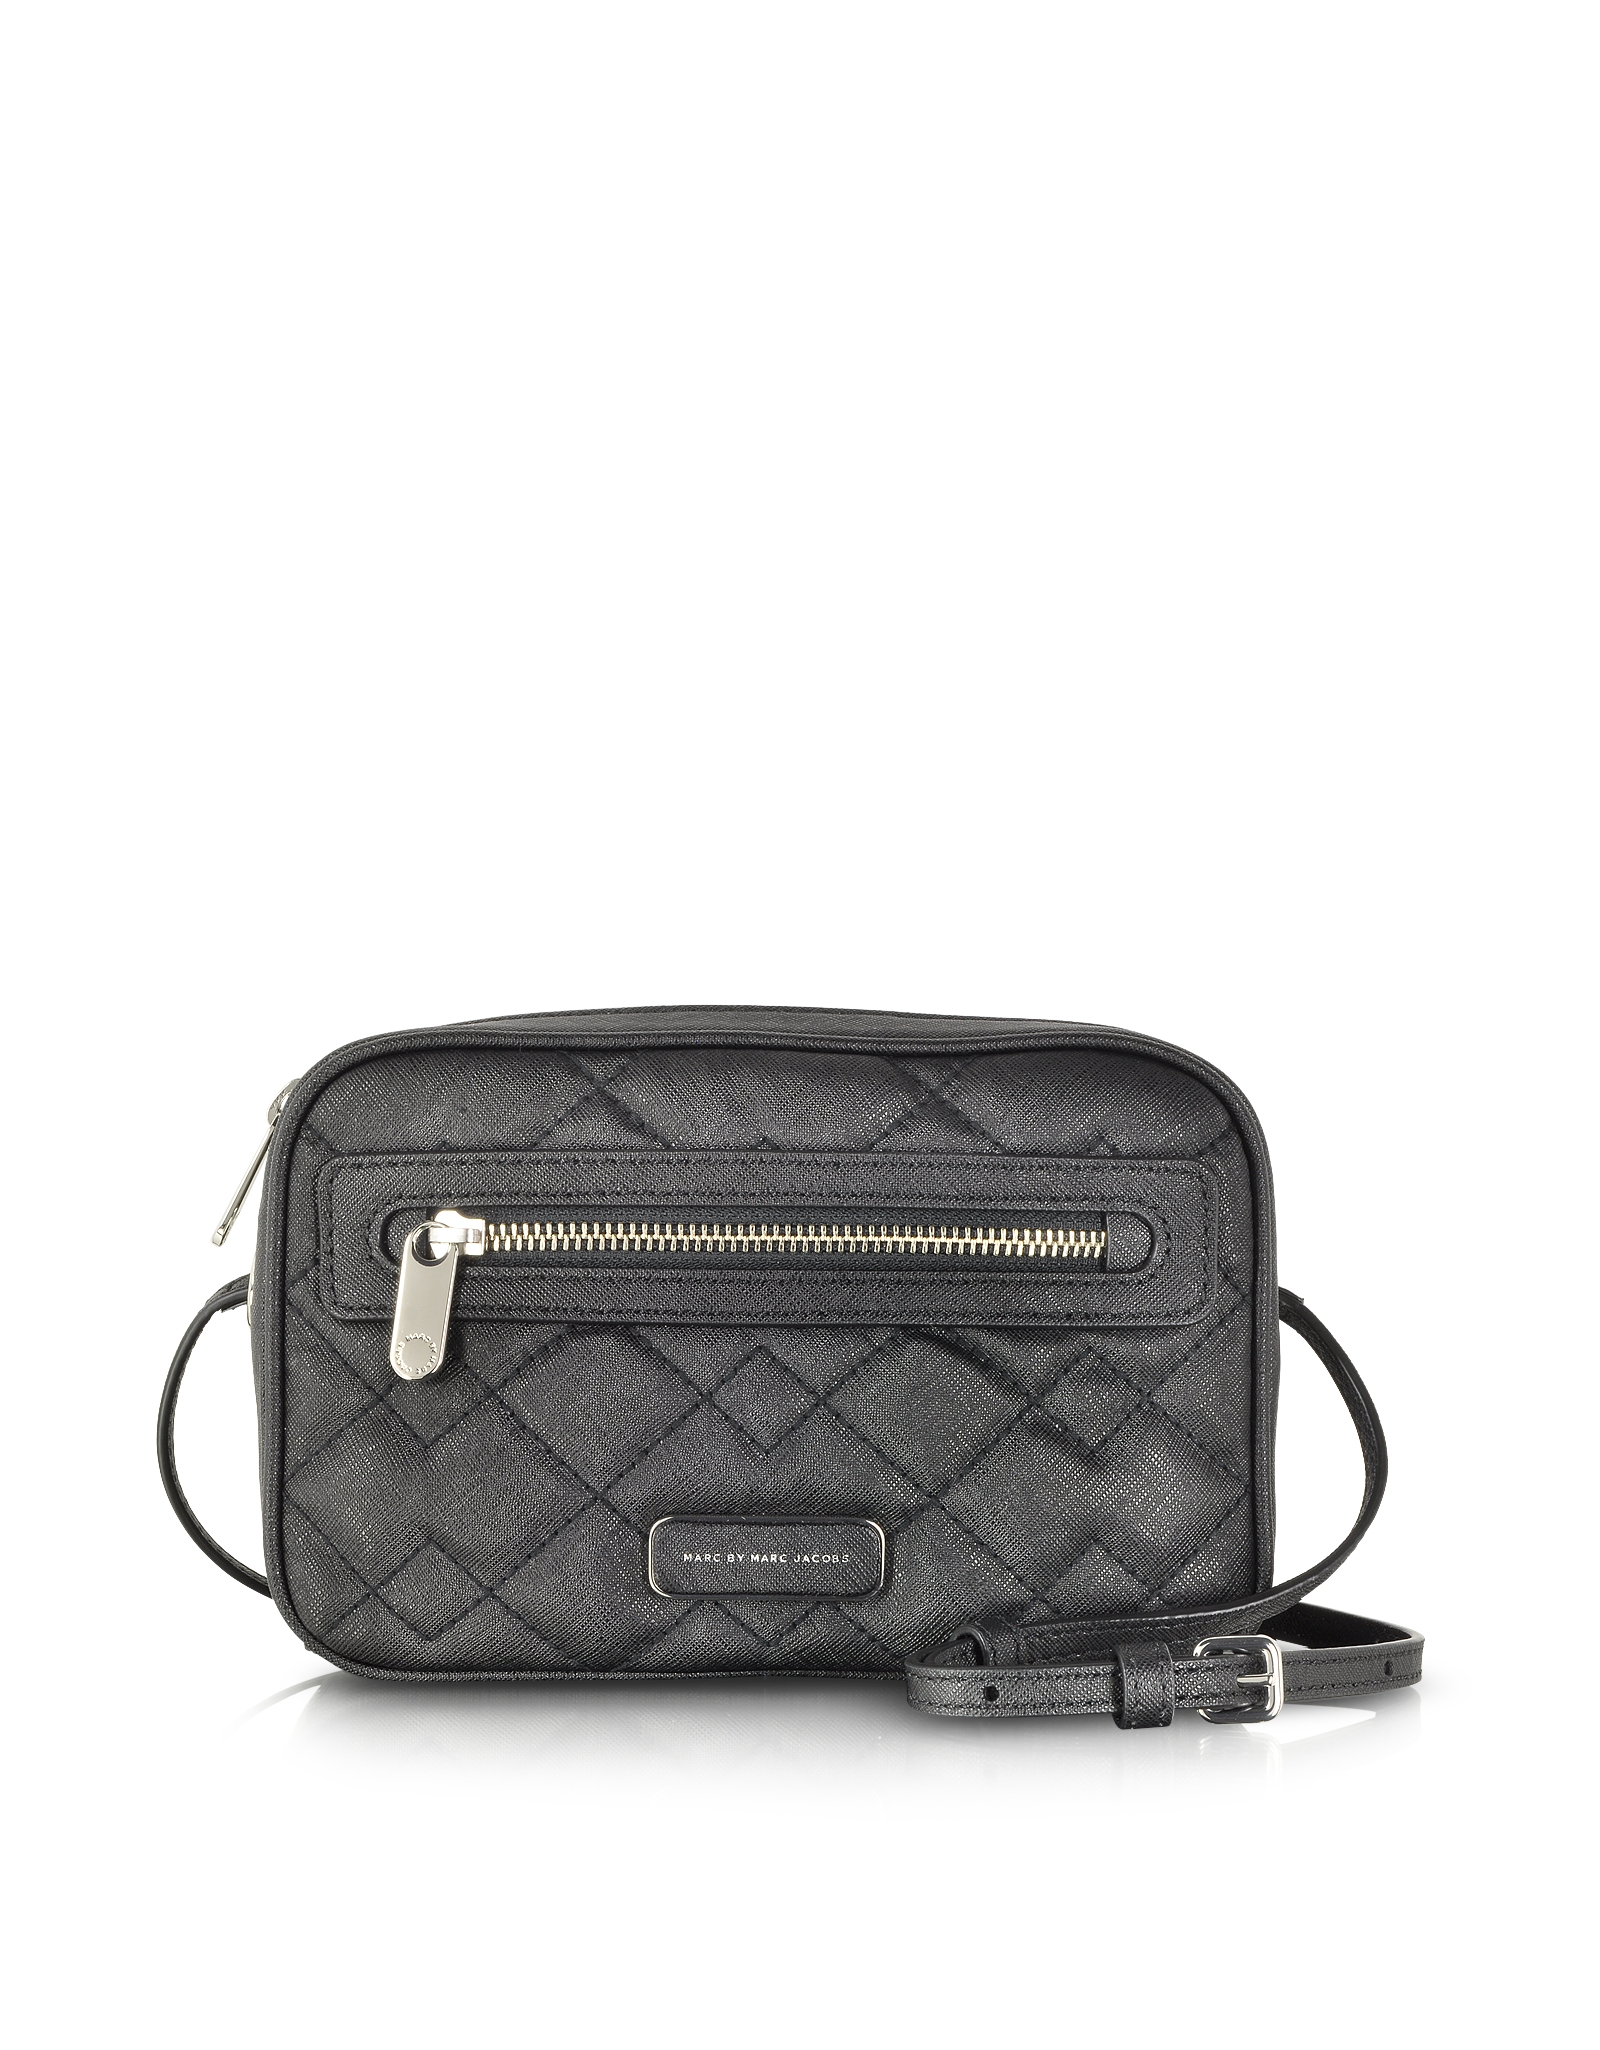 Lyst - Marc By Marc Jacobs Sally Quilted Saffiano Leather Crossbody Bag in Gray